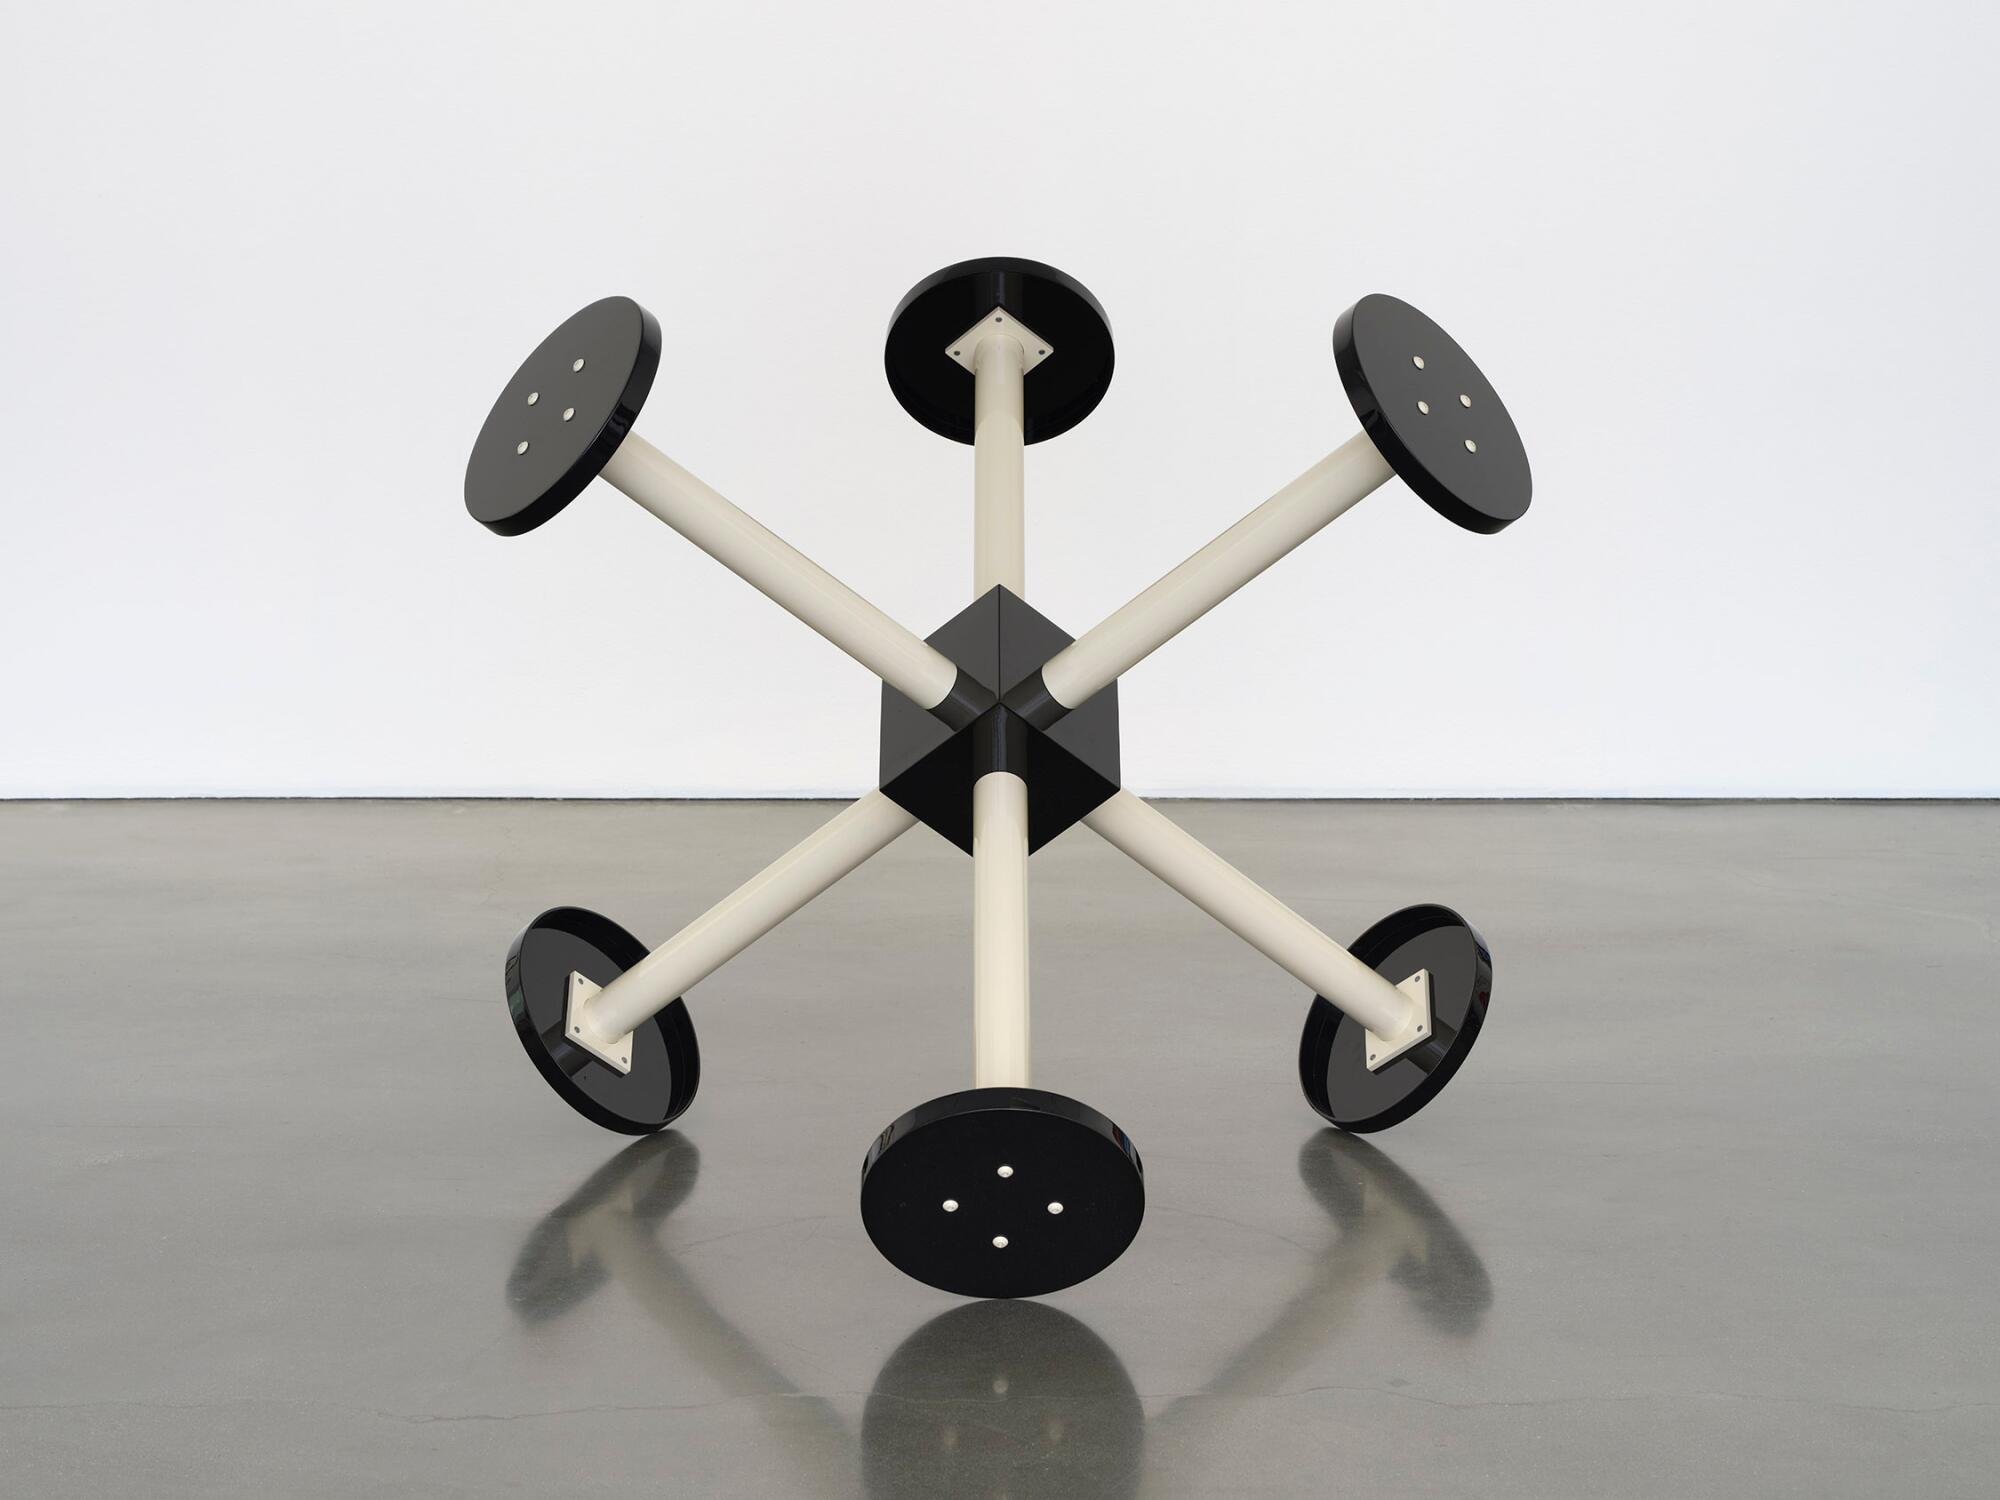 An artwork that looks like a black and white Tinkertoy construction